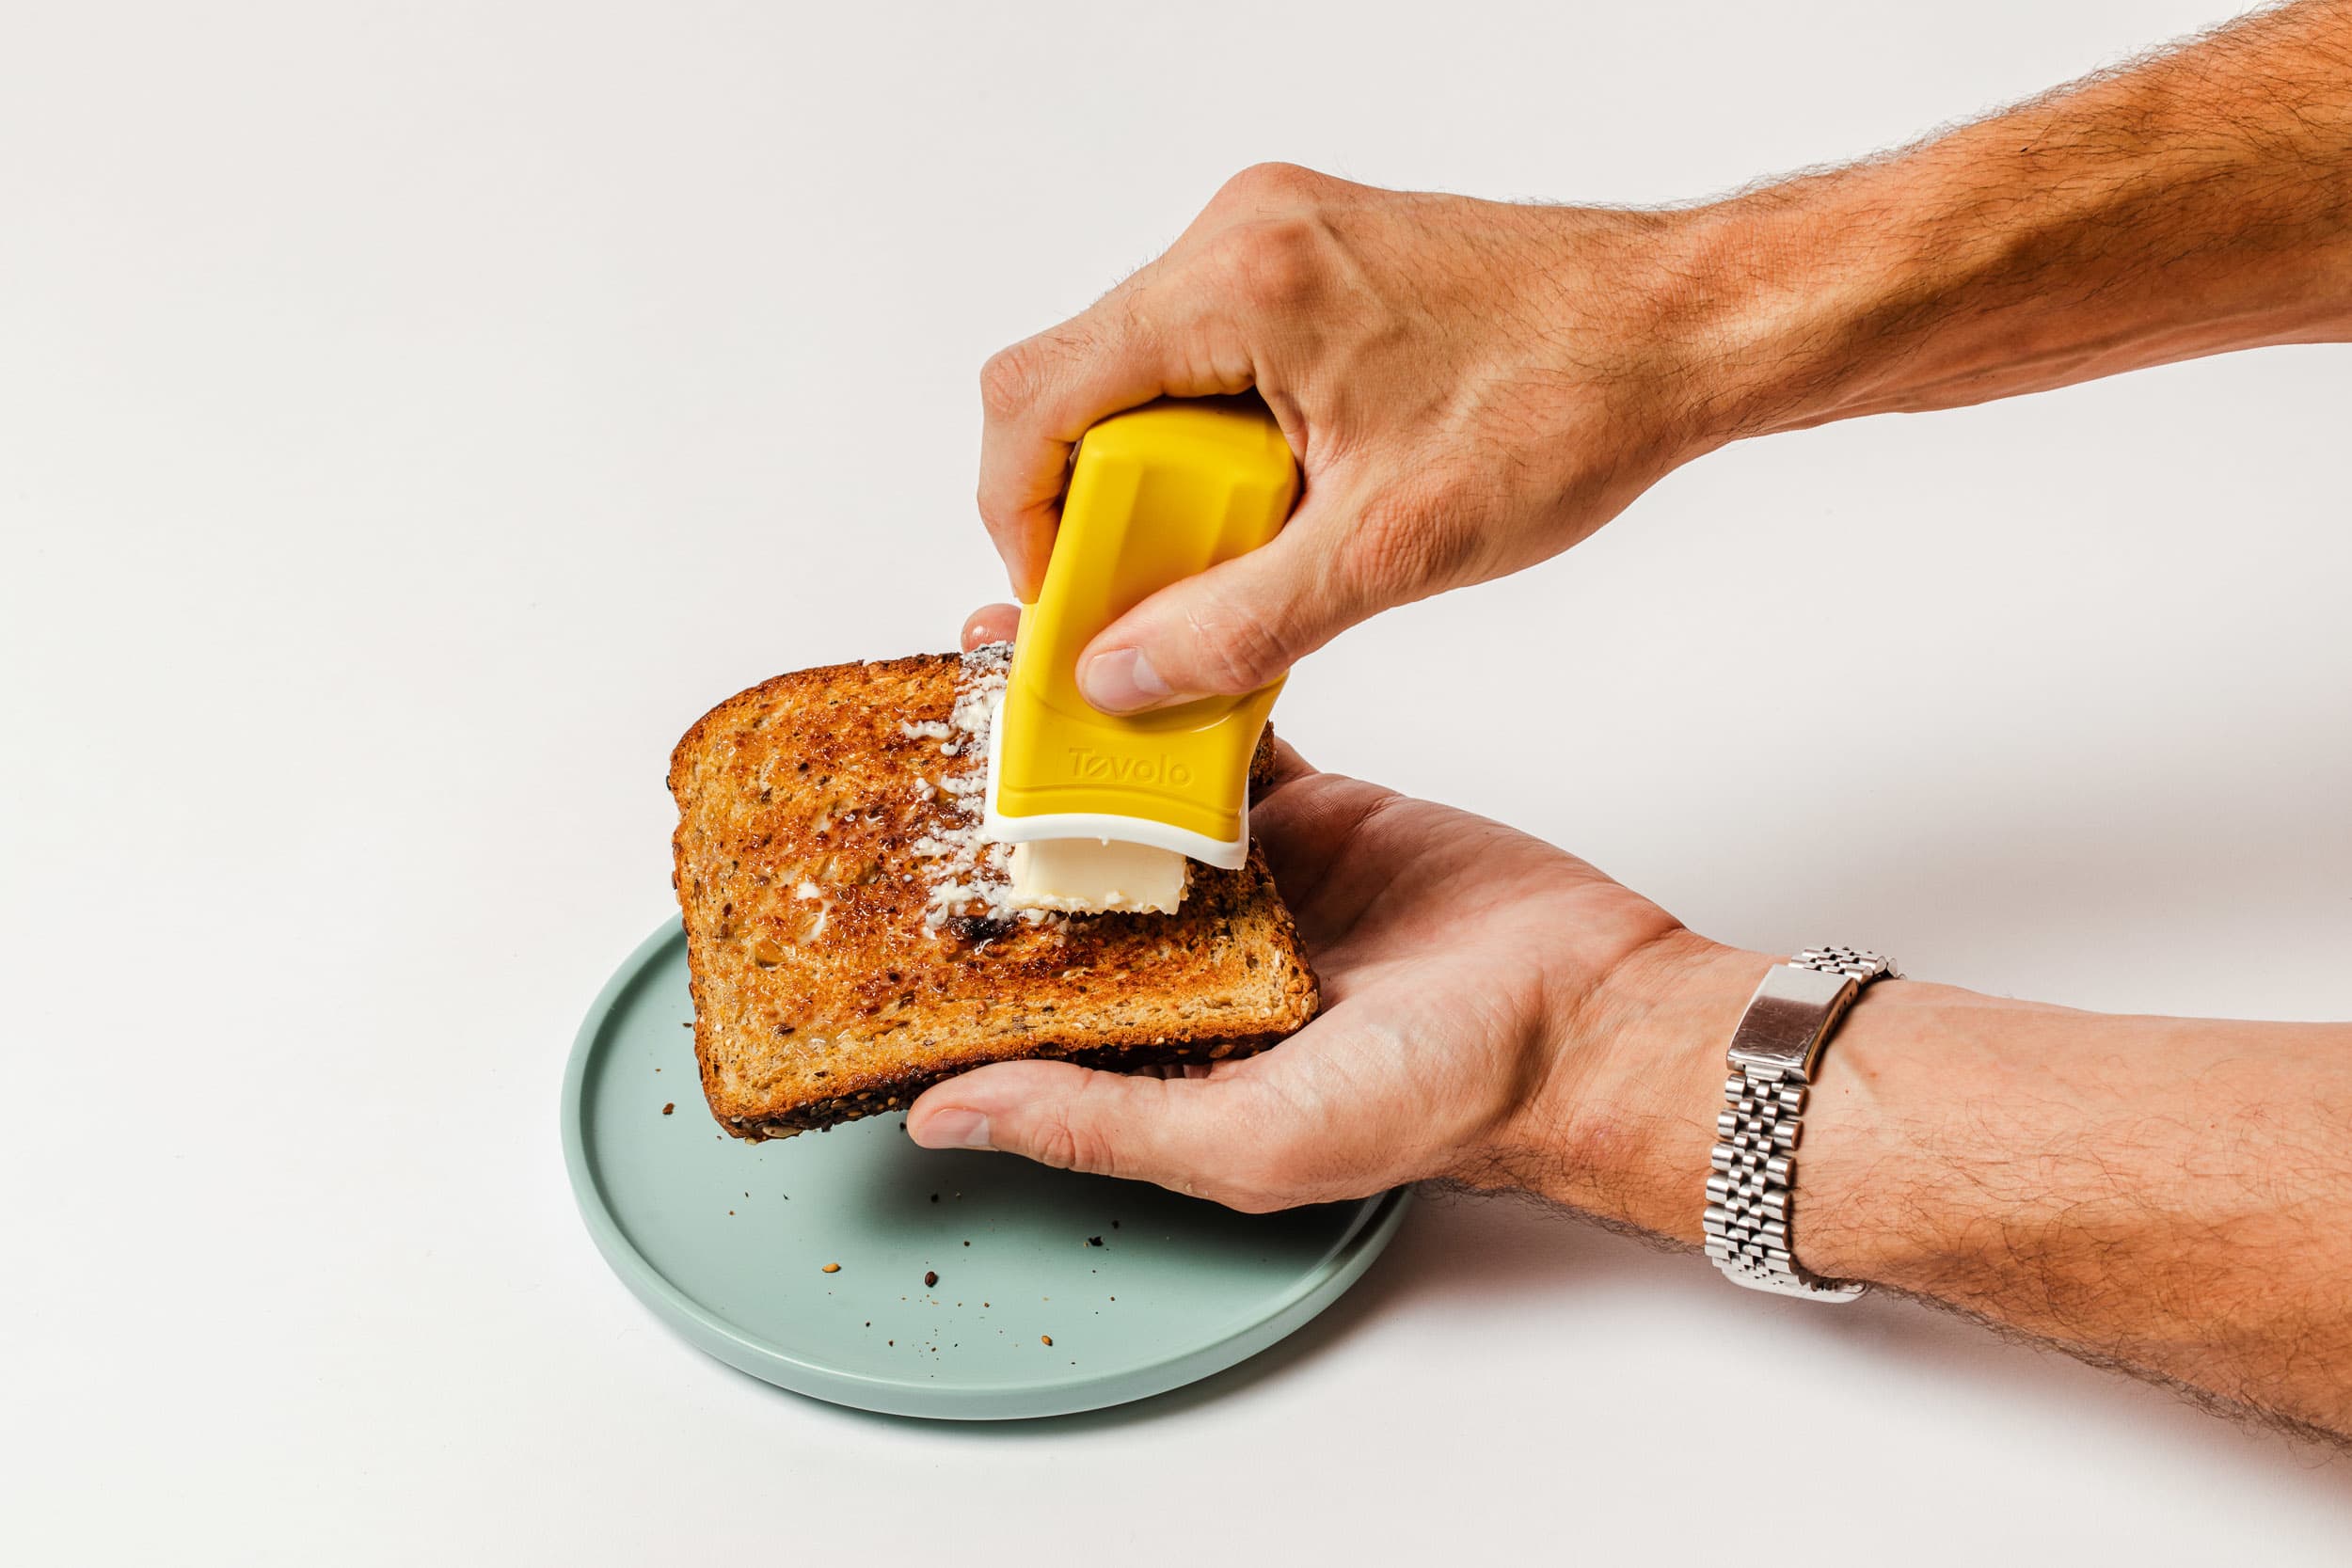 Use a bread knife to scrape cold butter and spread it easily